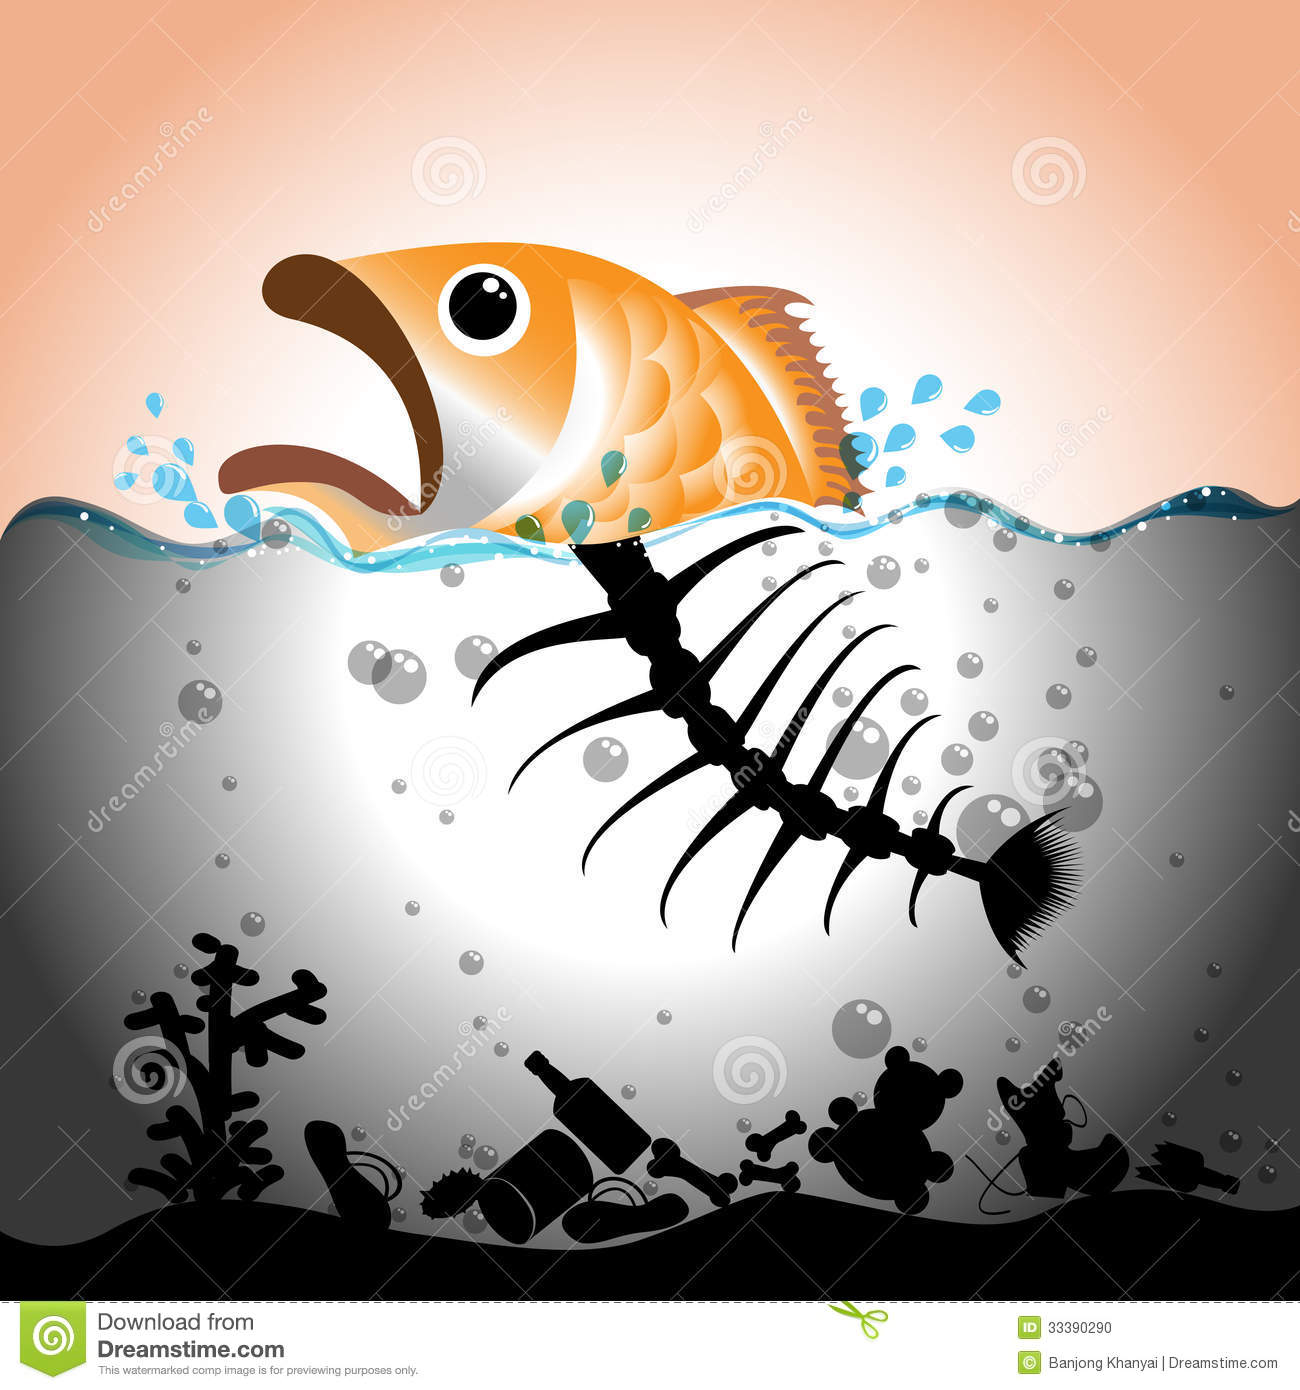 Illustration Of Fish And Fish Bone In In Polluted Water Water